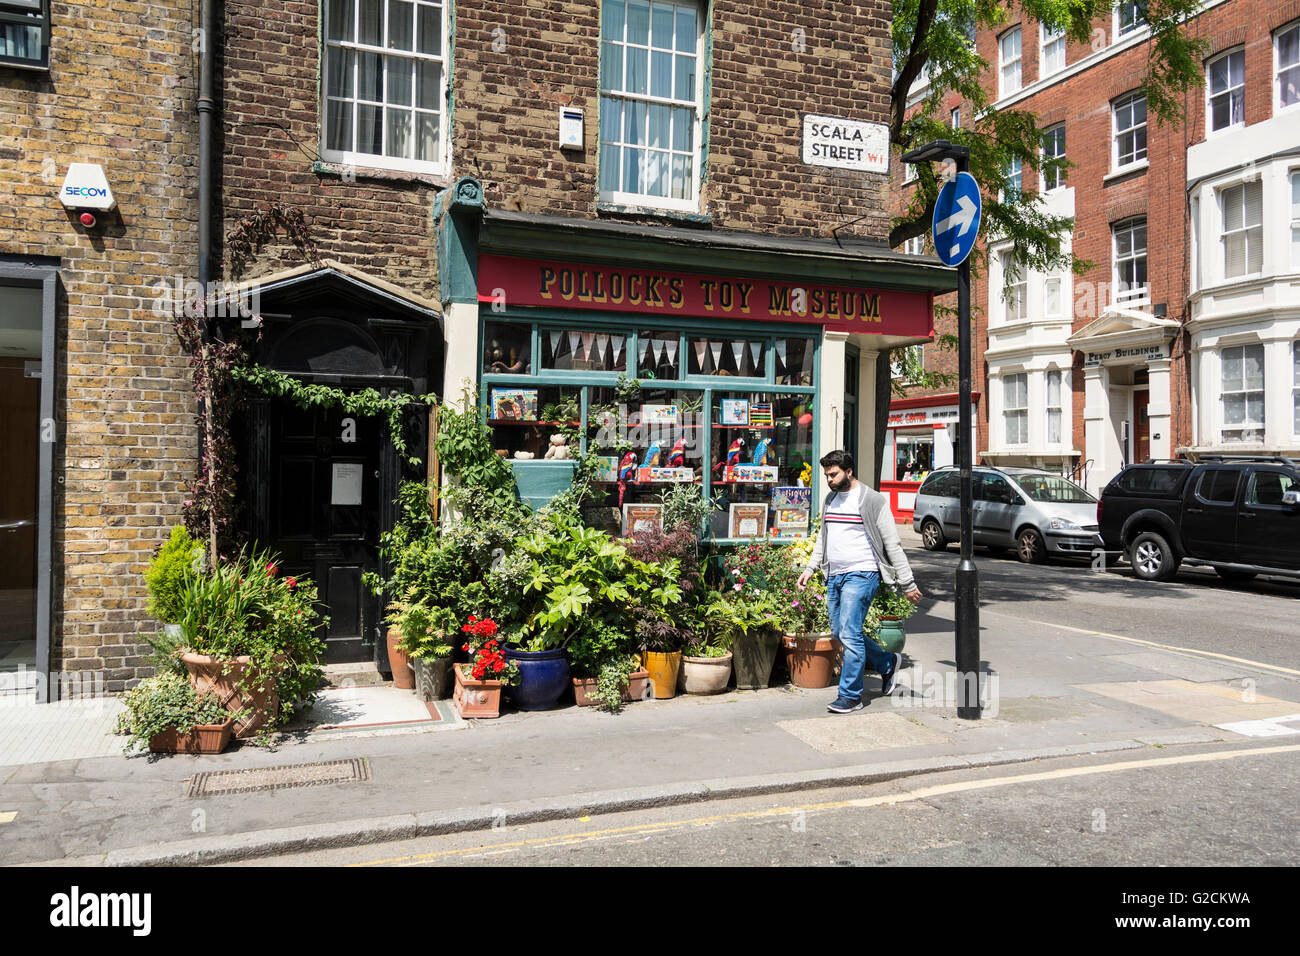 Exterior of Pollock's Toy Museum in Fitzrovia in central London, England, UK Stock Photo